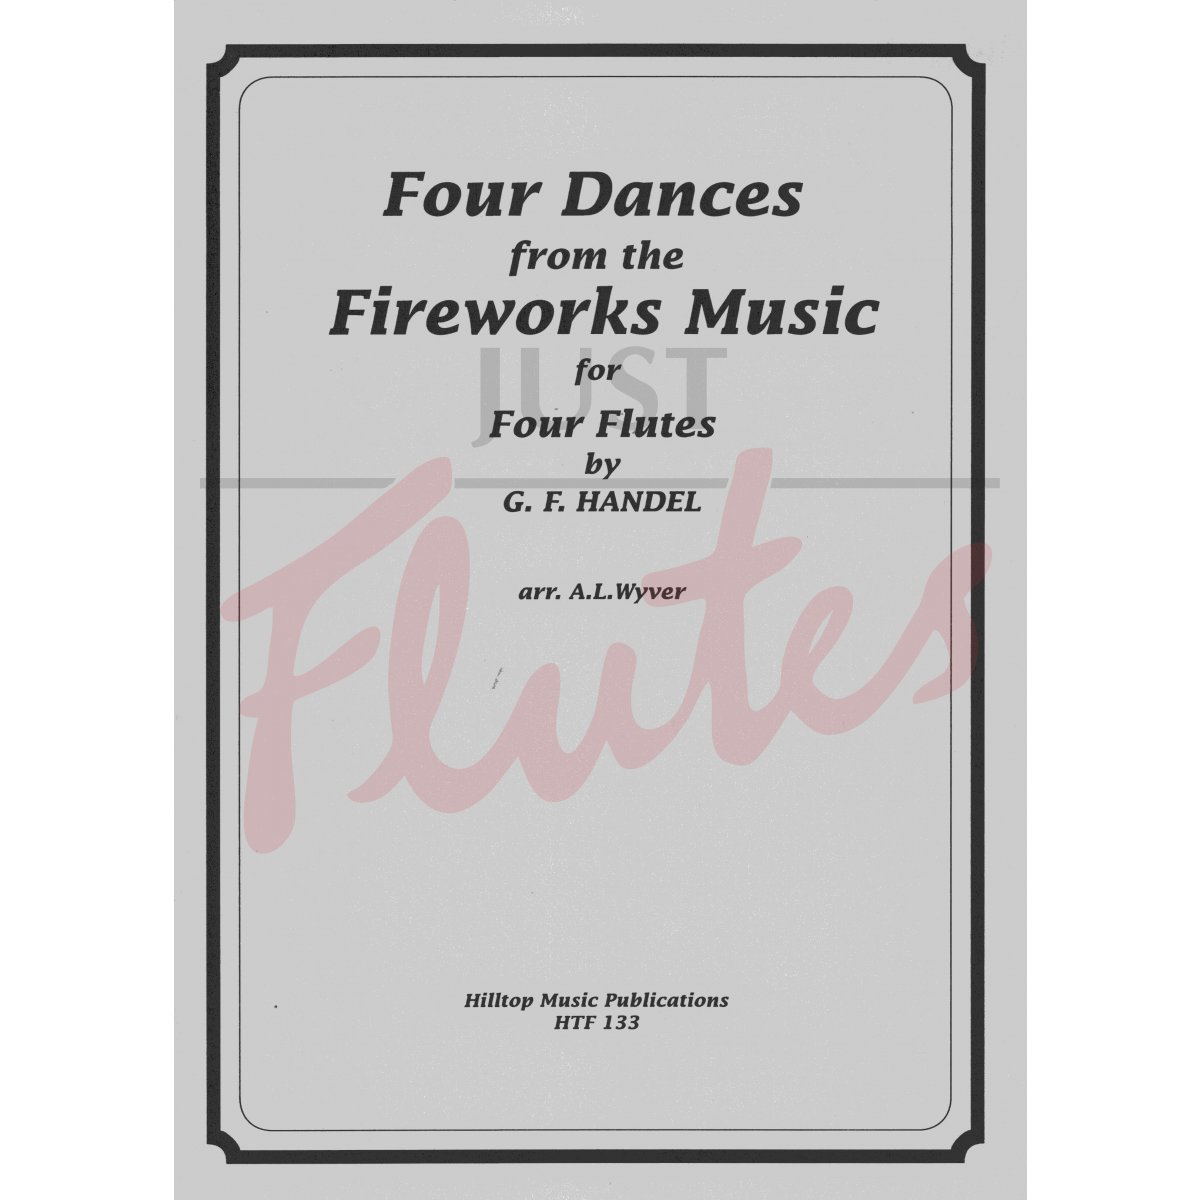 Four Dances from Fireworks Music